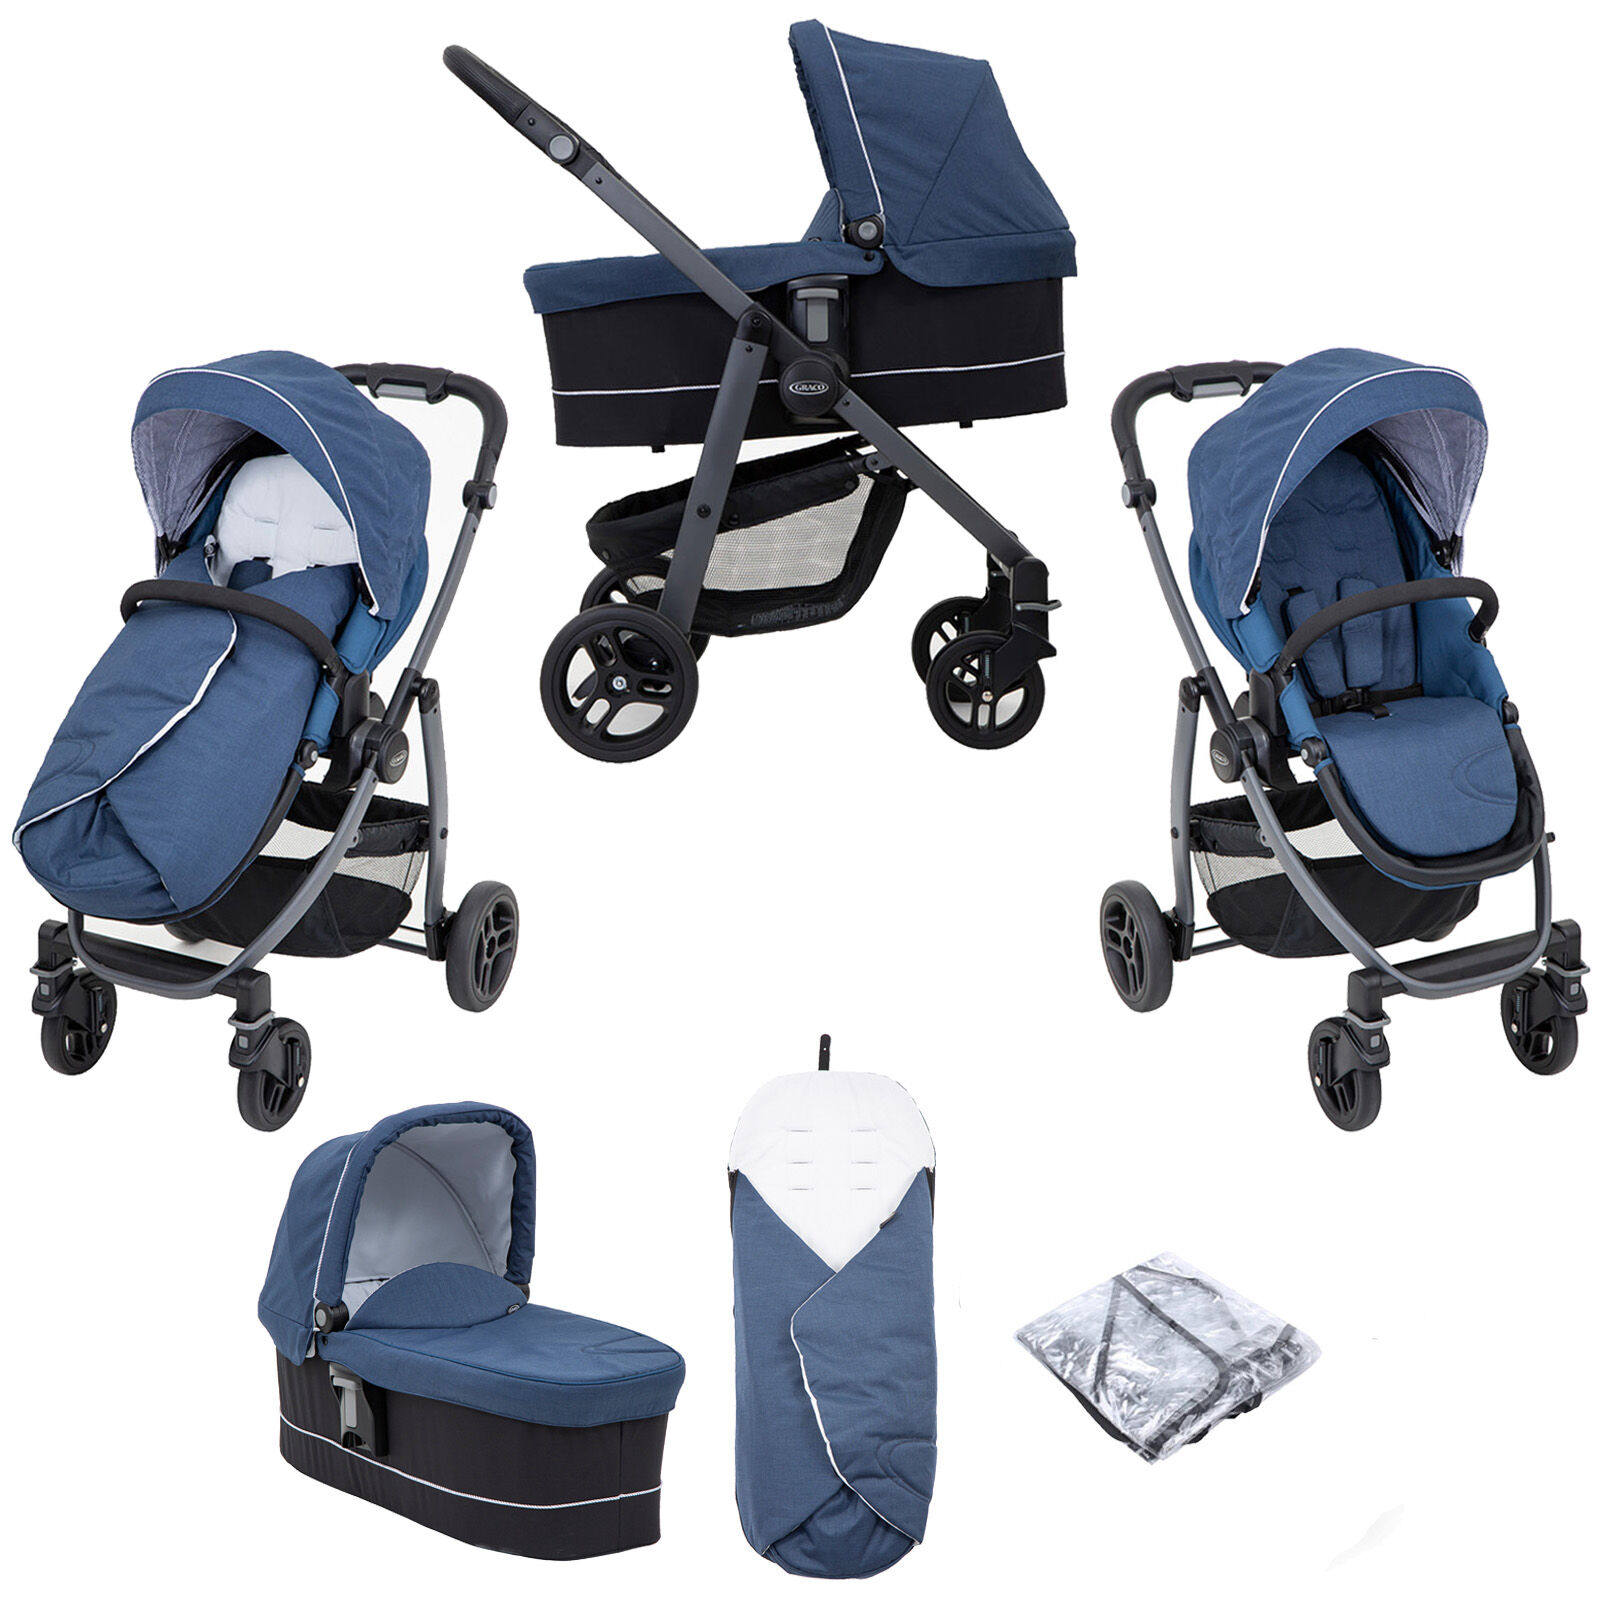 Graco Evo Avant Pushchair Stroller With Carrycot - Ink